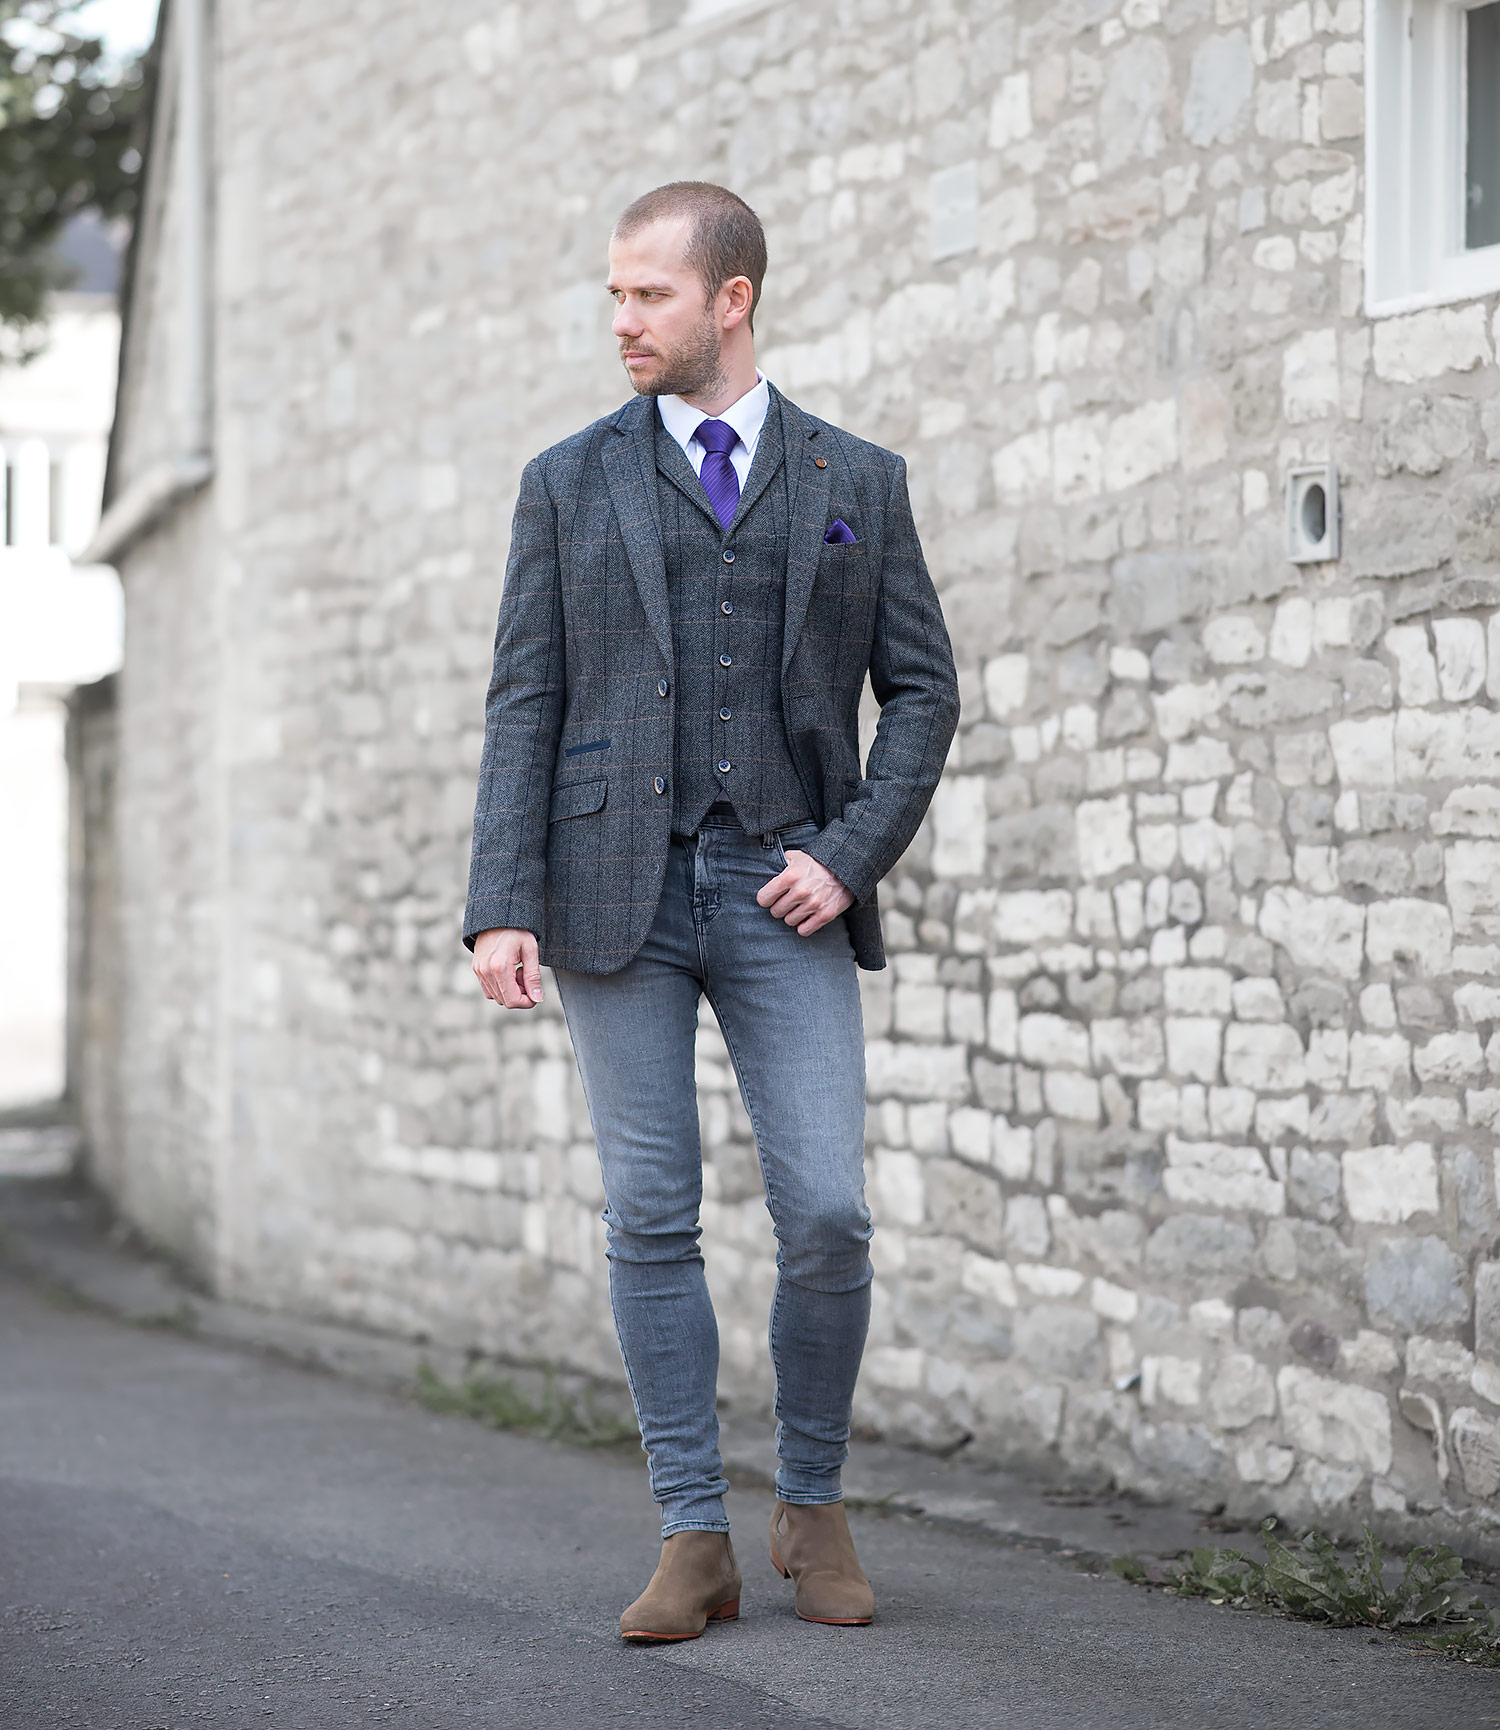 Tweed Suit With J Brand Jeans - Your Average Guy